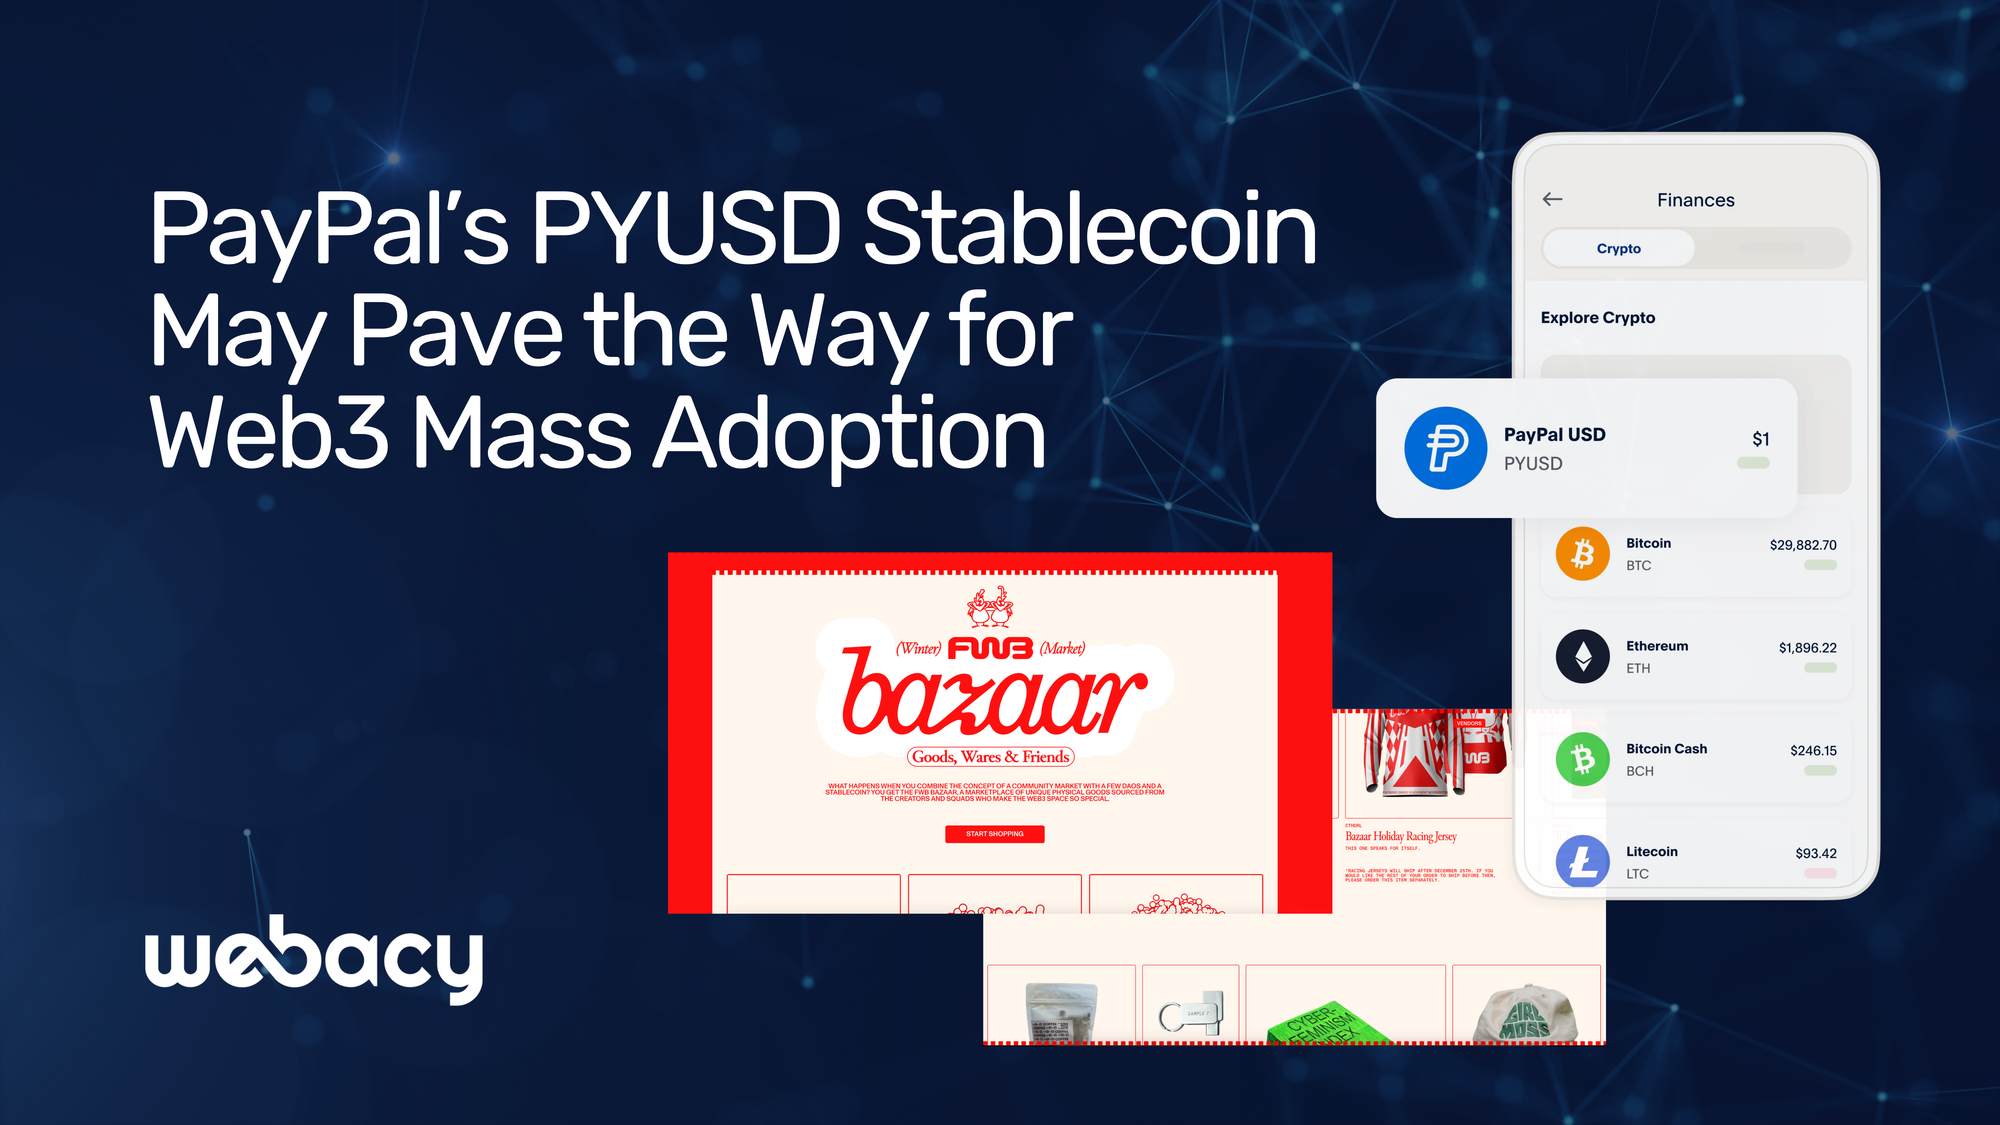 PayPal’s PYUSD Stablecoin May Pave the Way for Web3 Mass Adoption